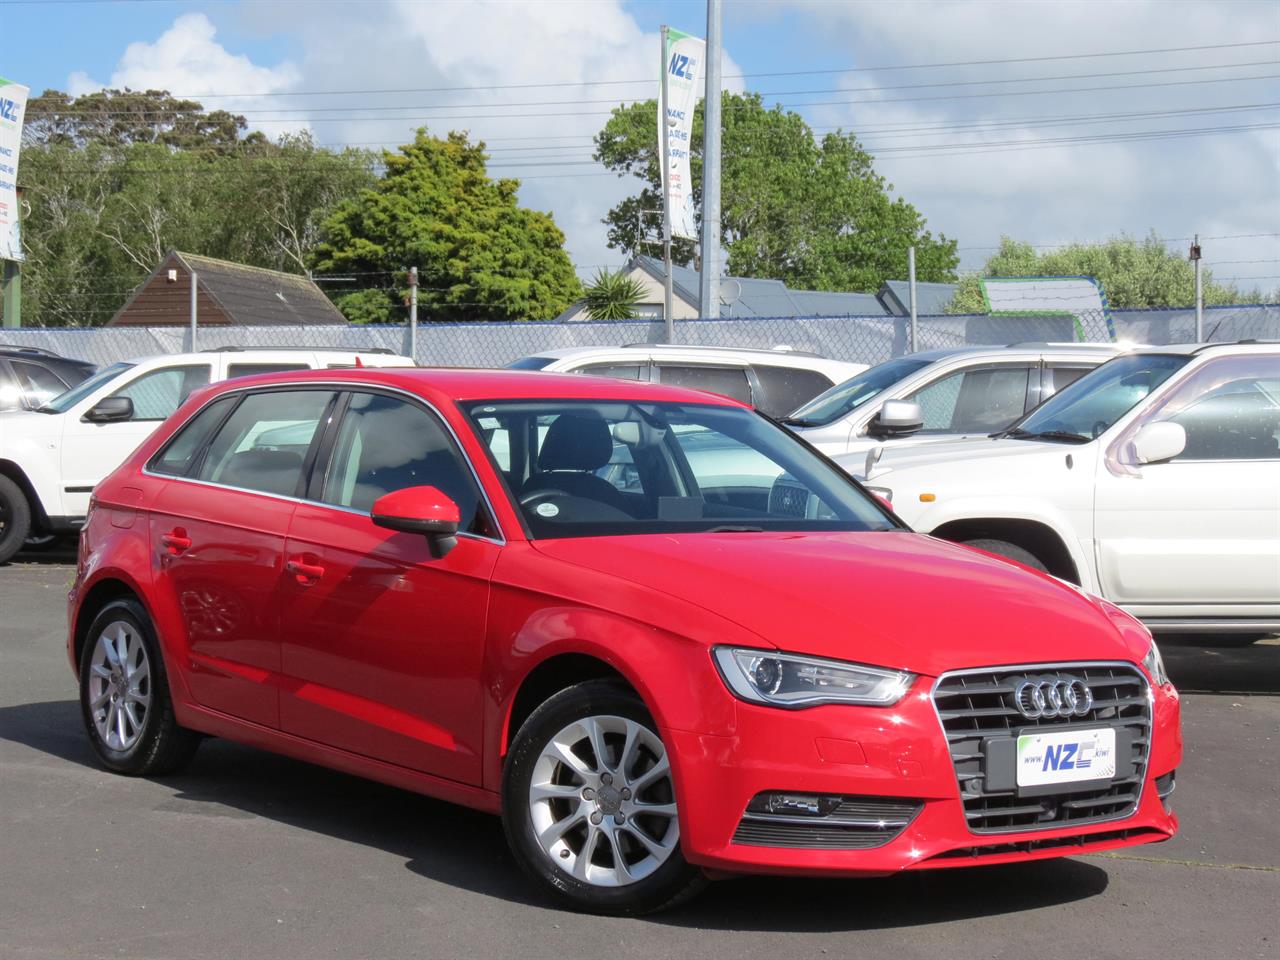 NZC 2013 Audi A3 just arrived to Auckland